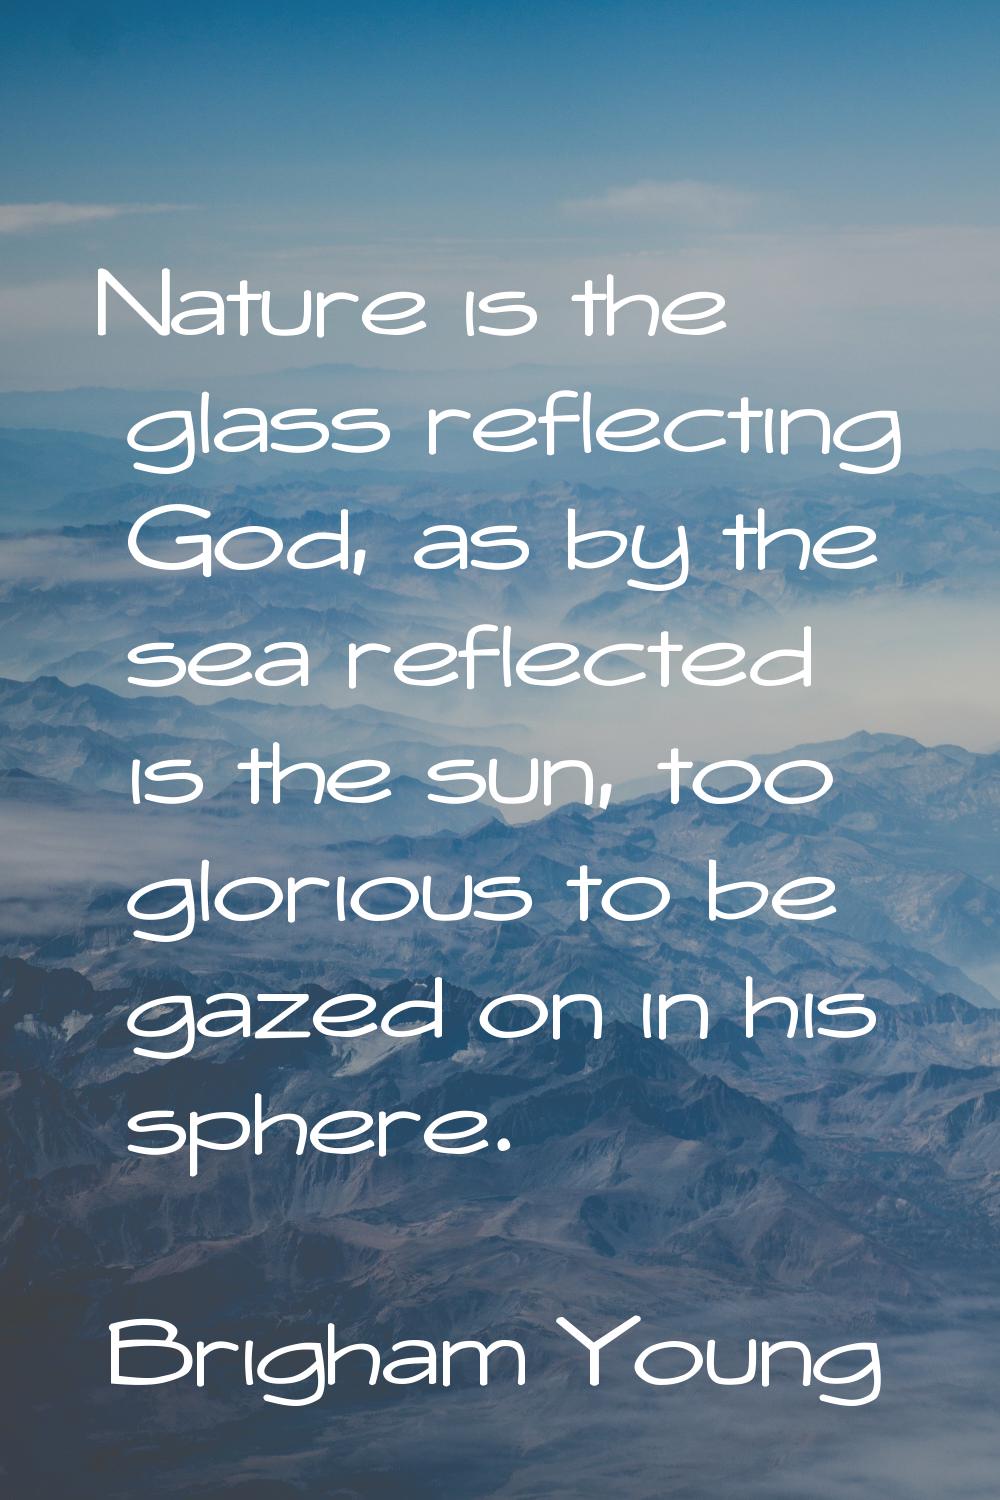 Nature is the glass reflecting God, as by the sea reflected is the sun, too glorious to be gazed on